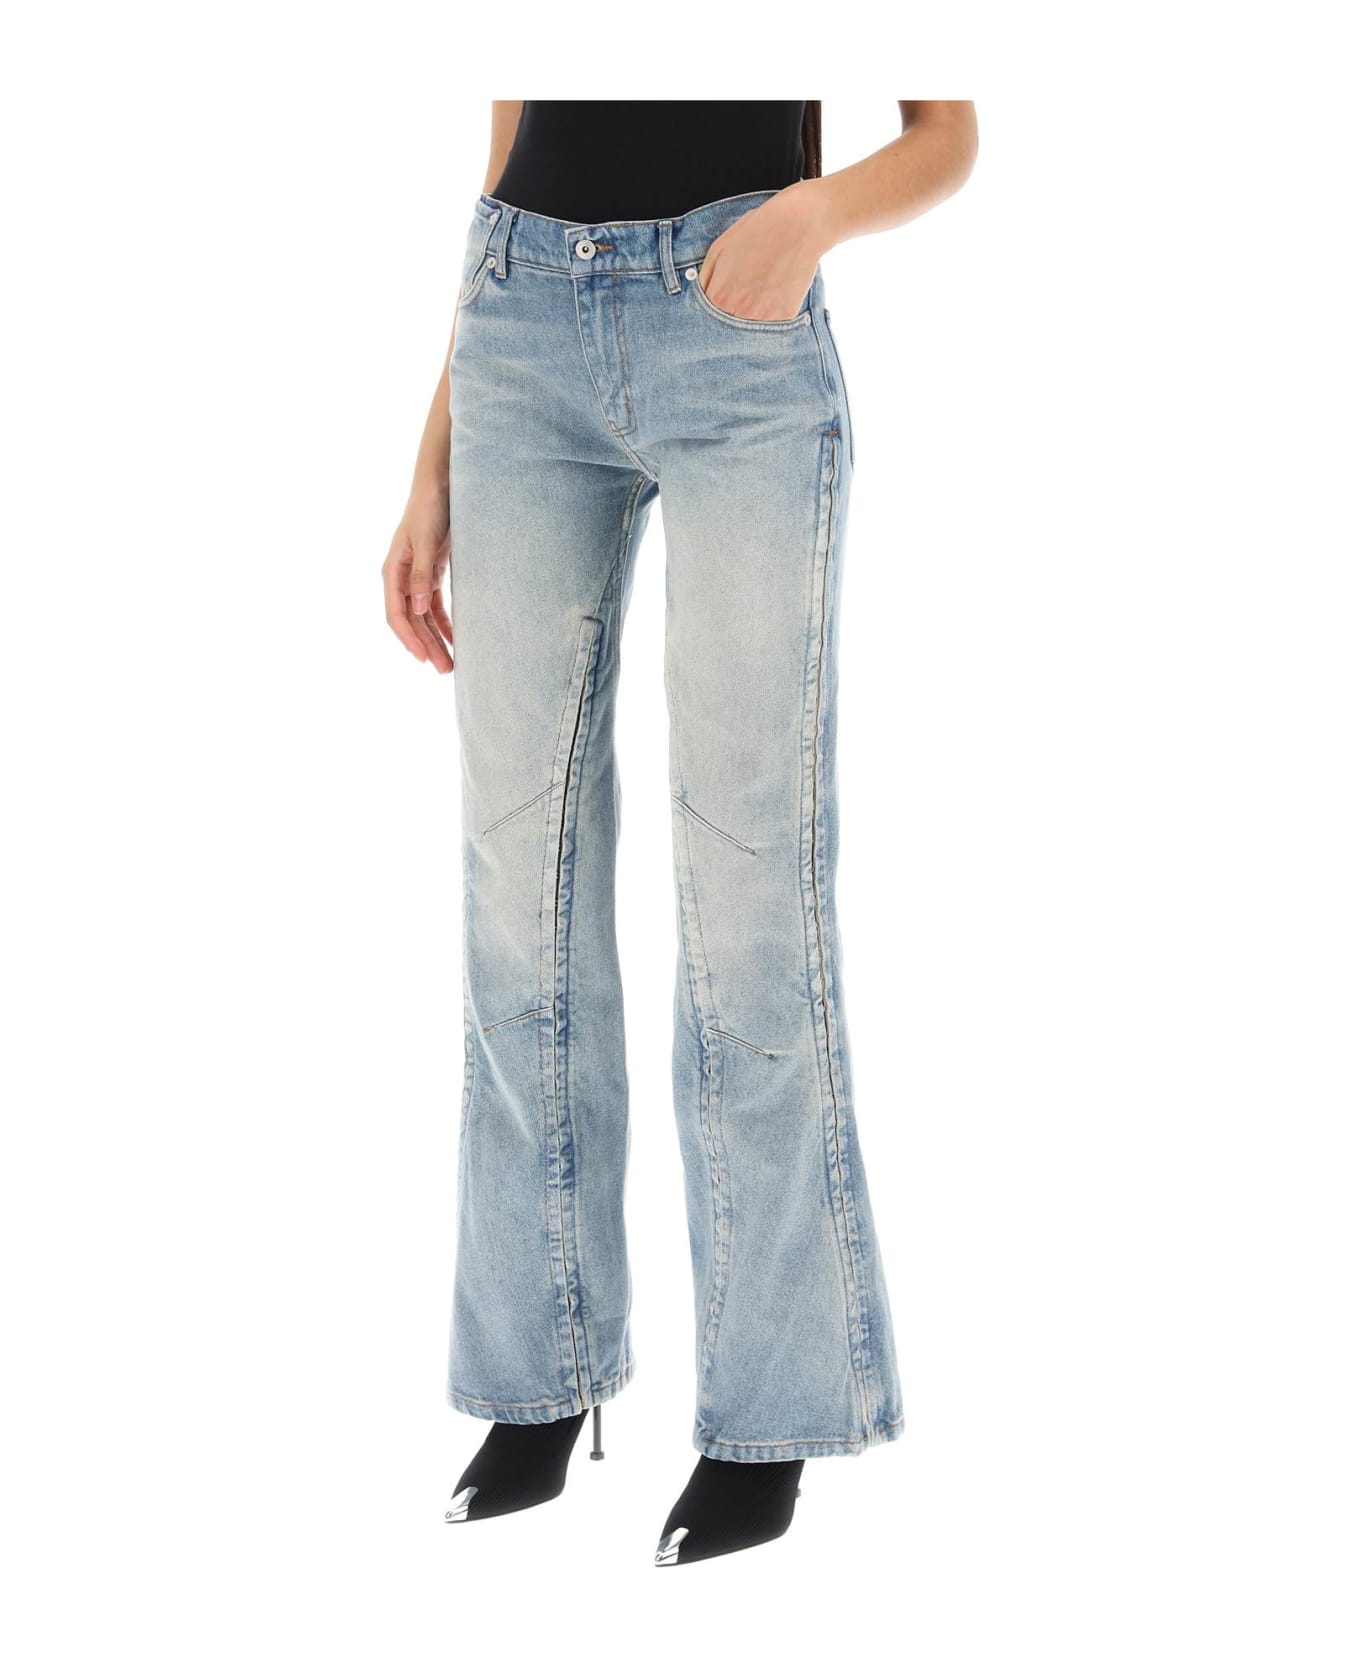 Y/Project Hook-and-eye Flared Jeans - LIGHT SAND BLUE (Blue)